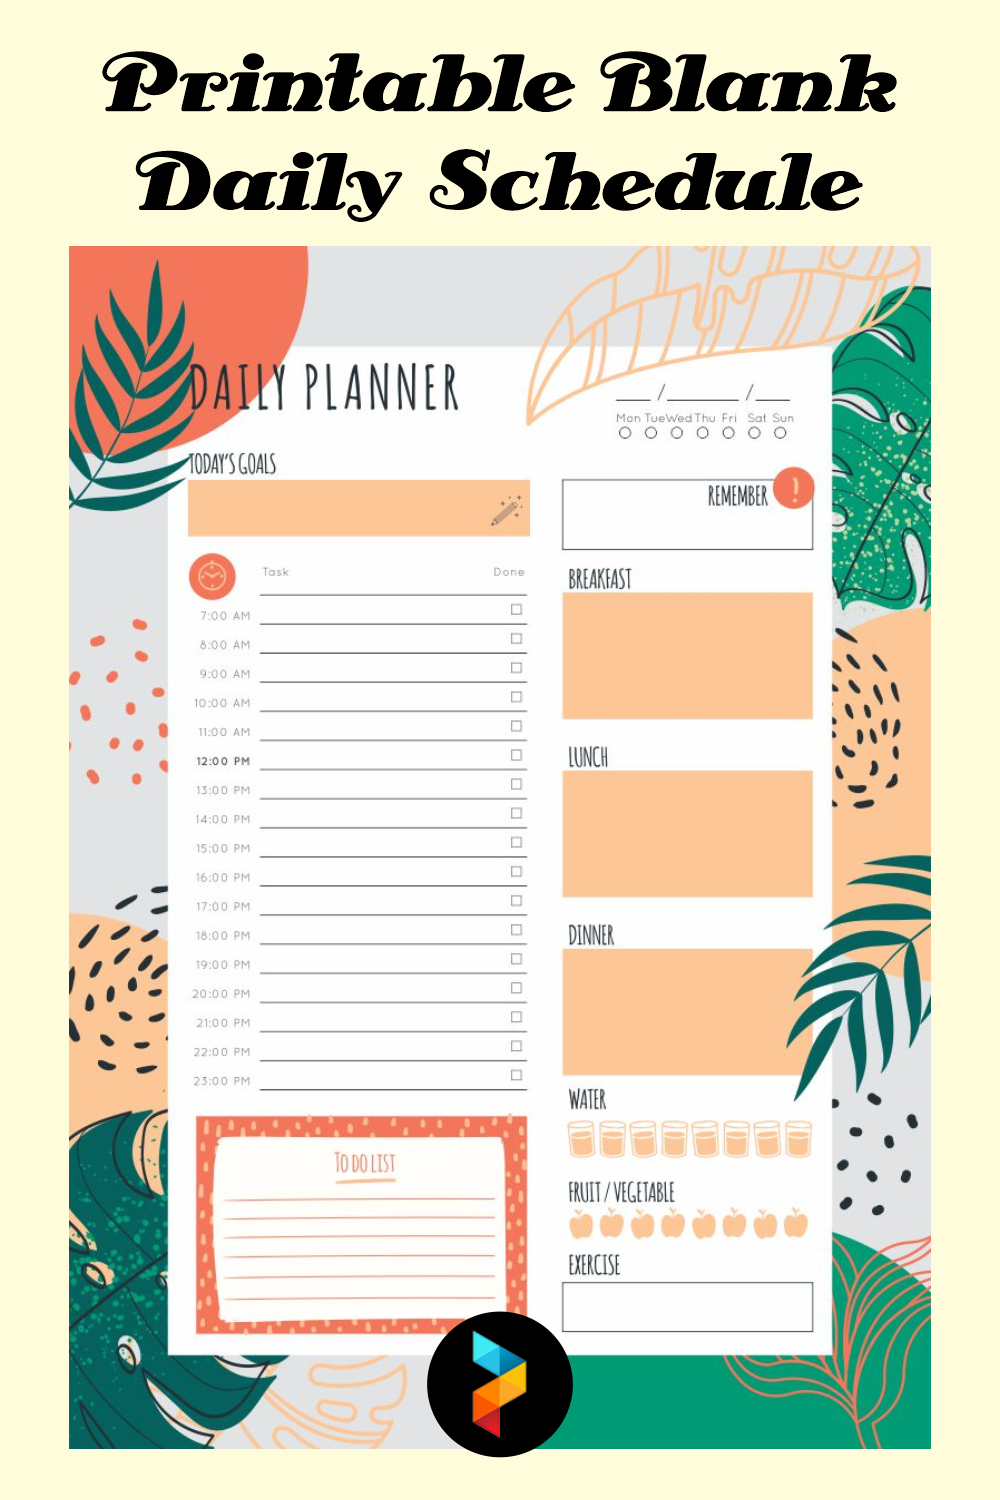 Printable Blank Daily Schedule